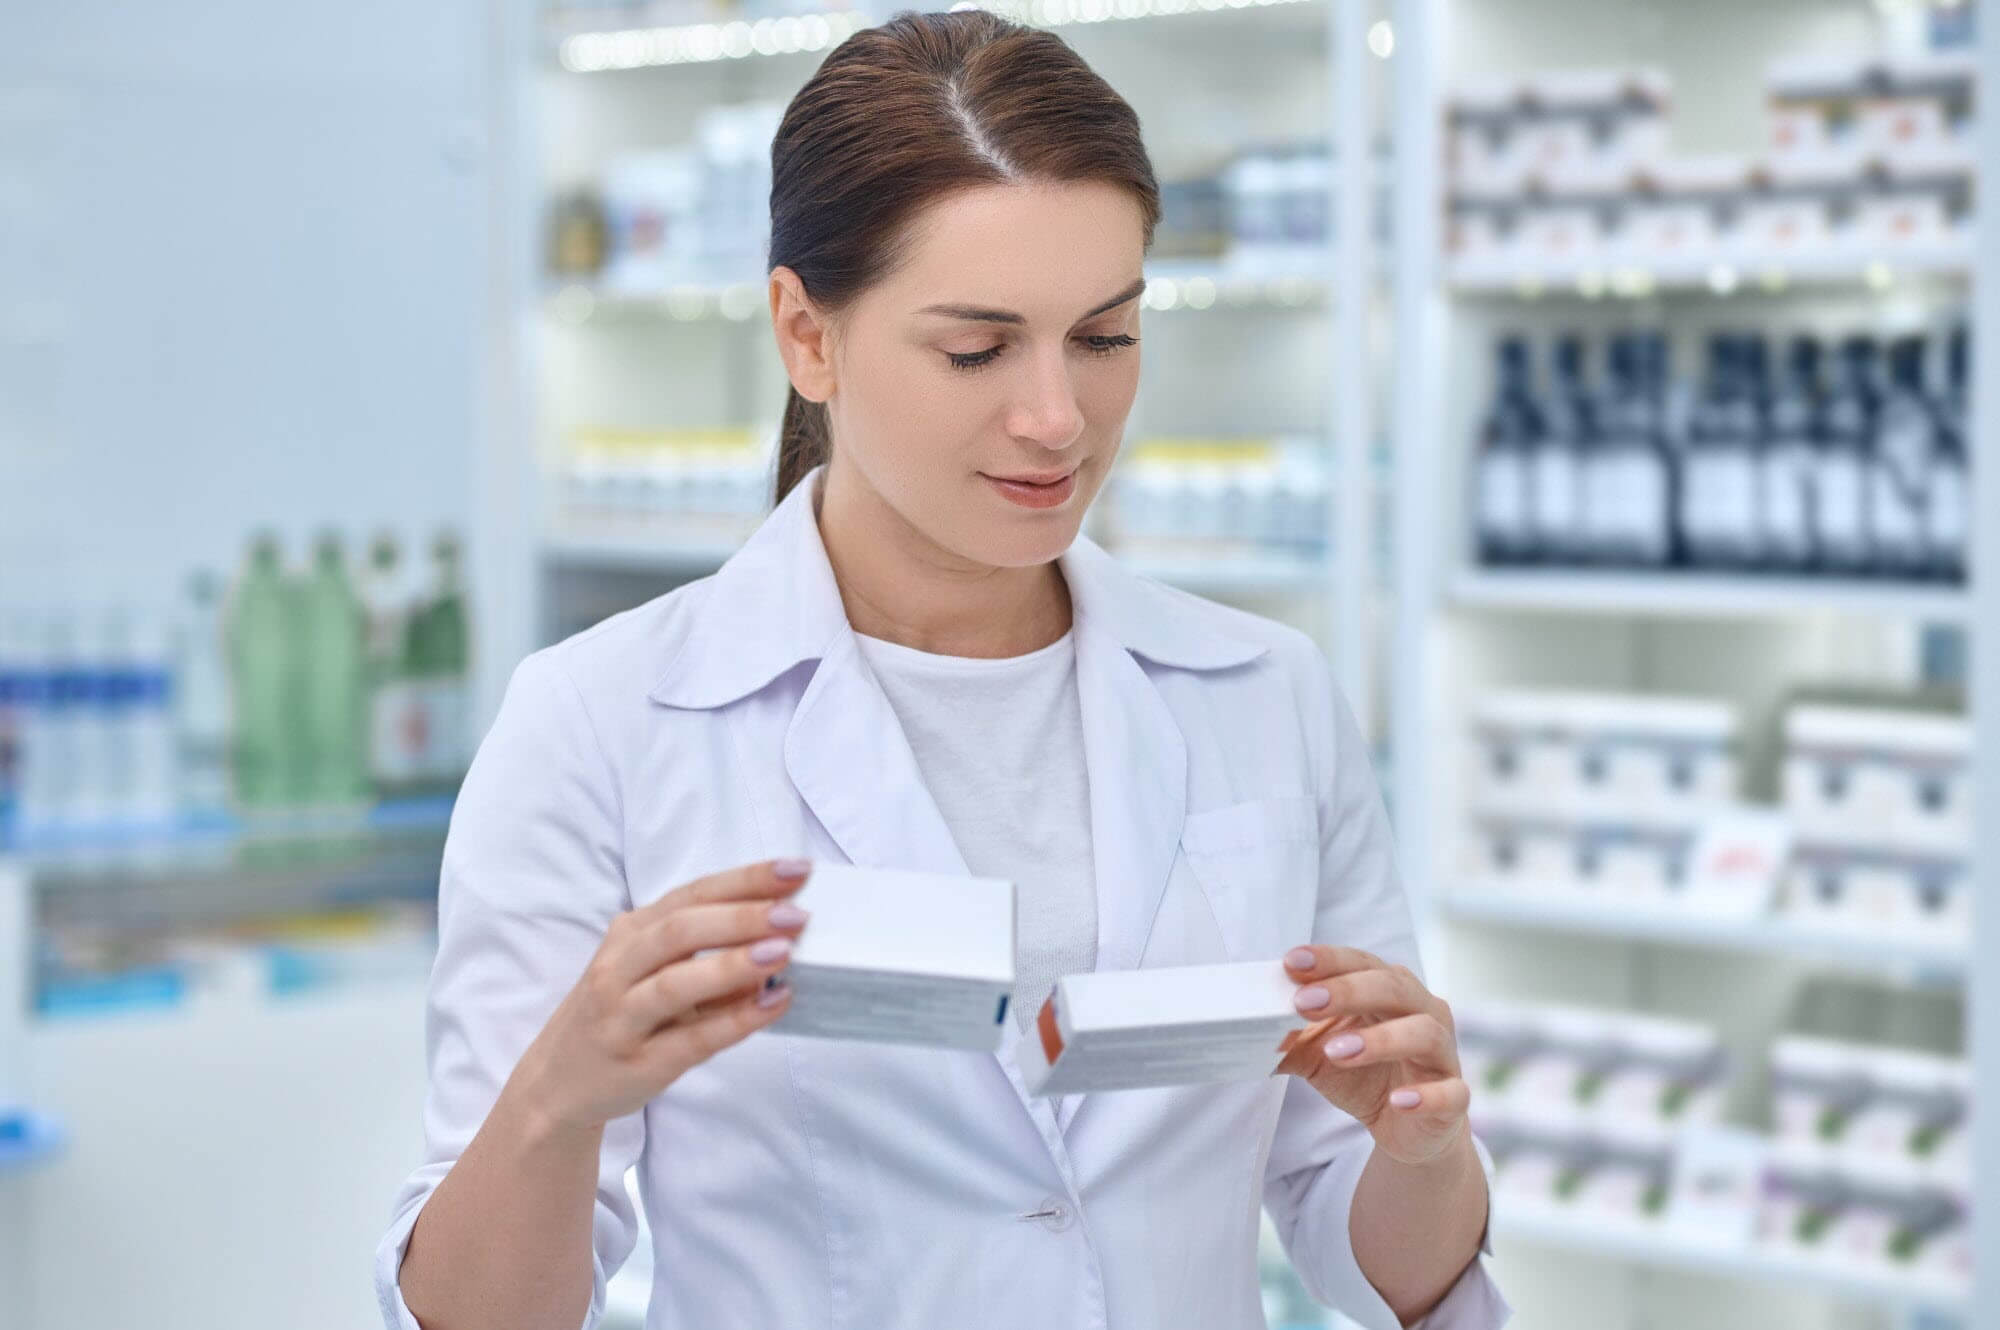 women looking at pharmaceutical packaged products